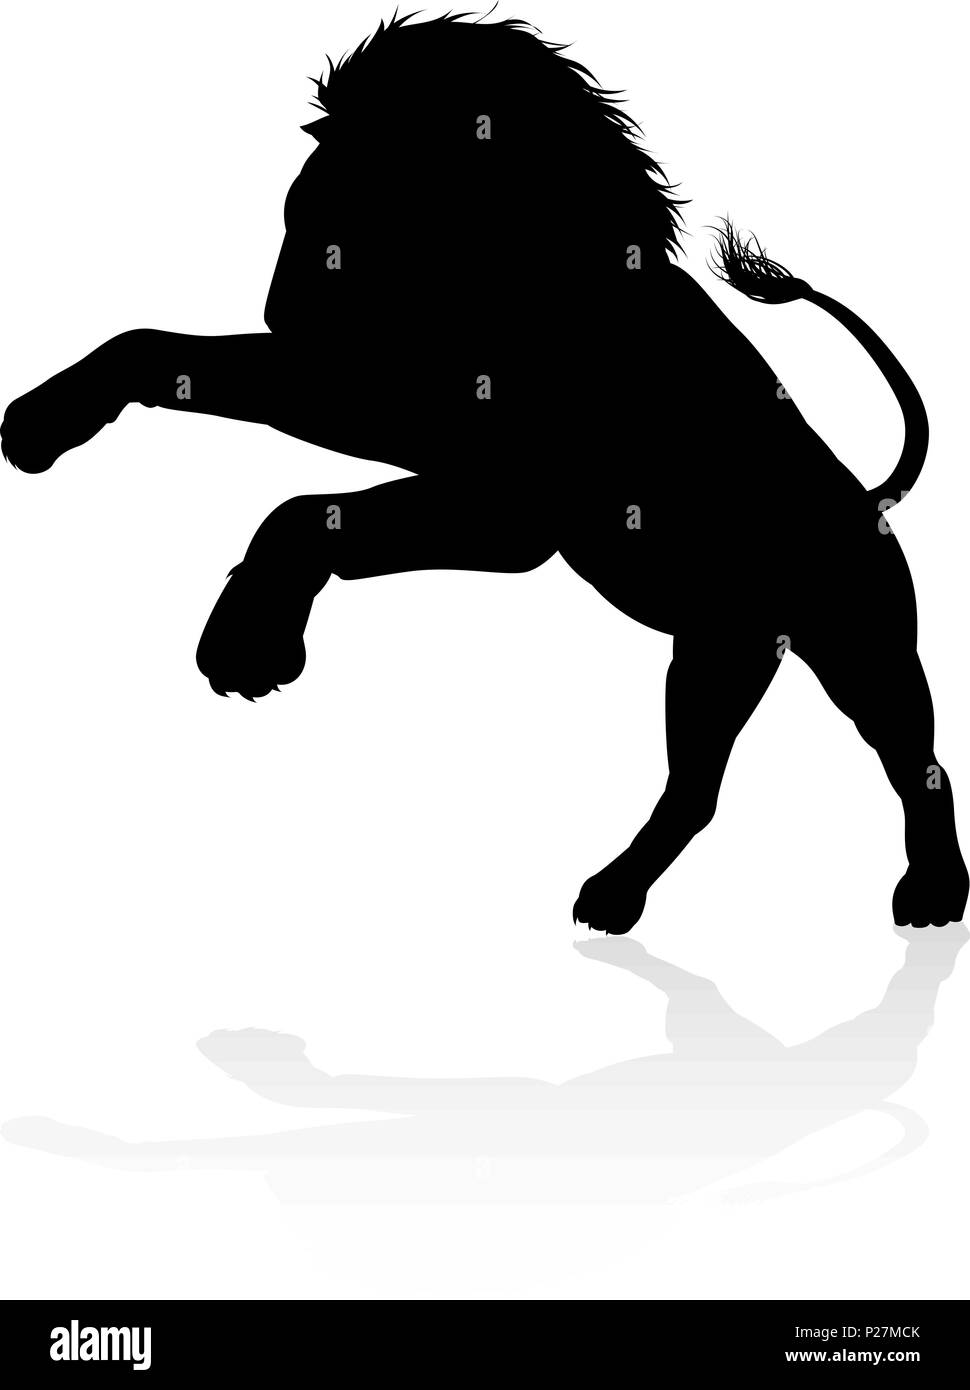 Silhouette Lion Graphic Stock Vector